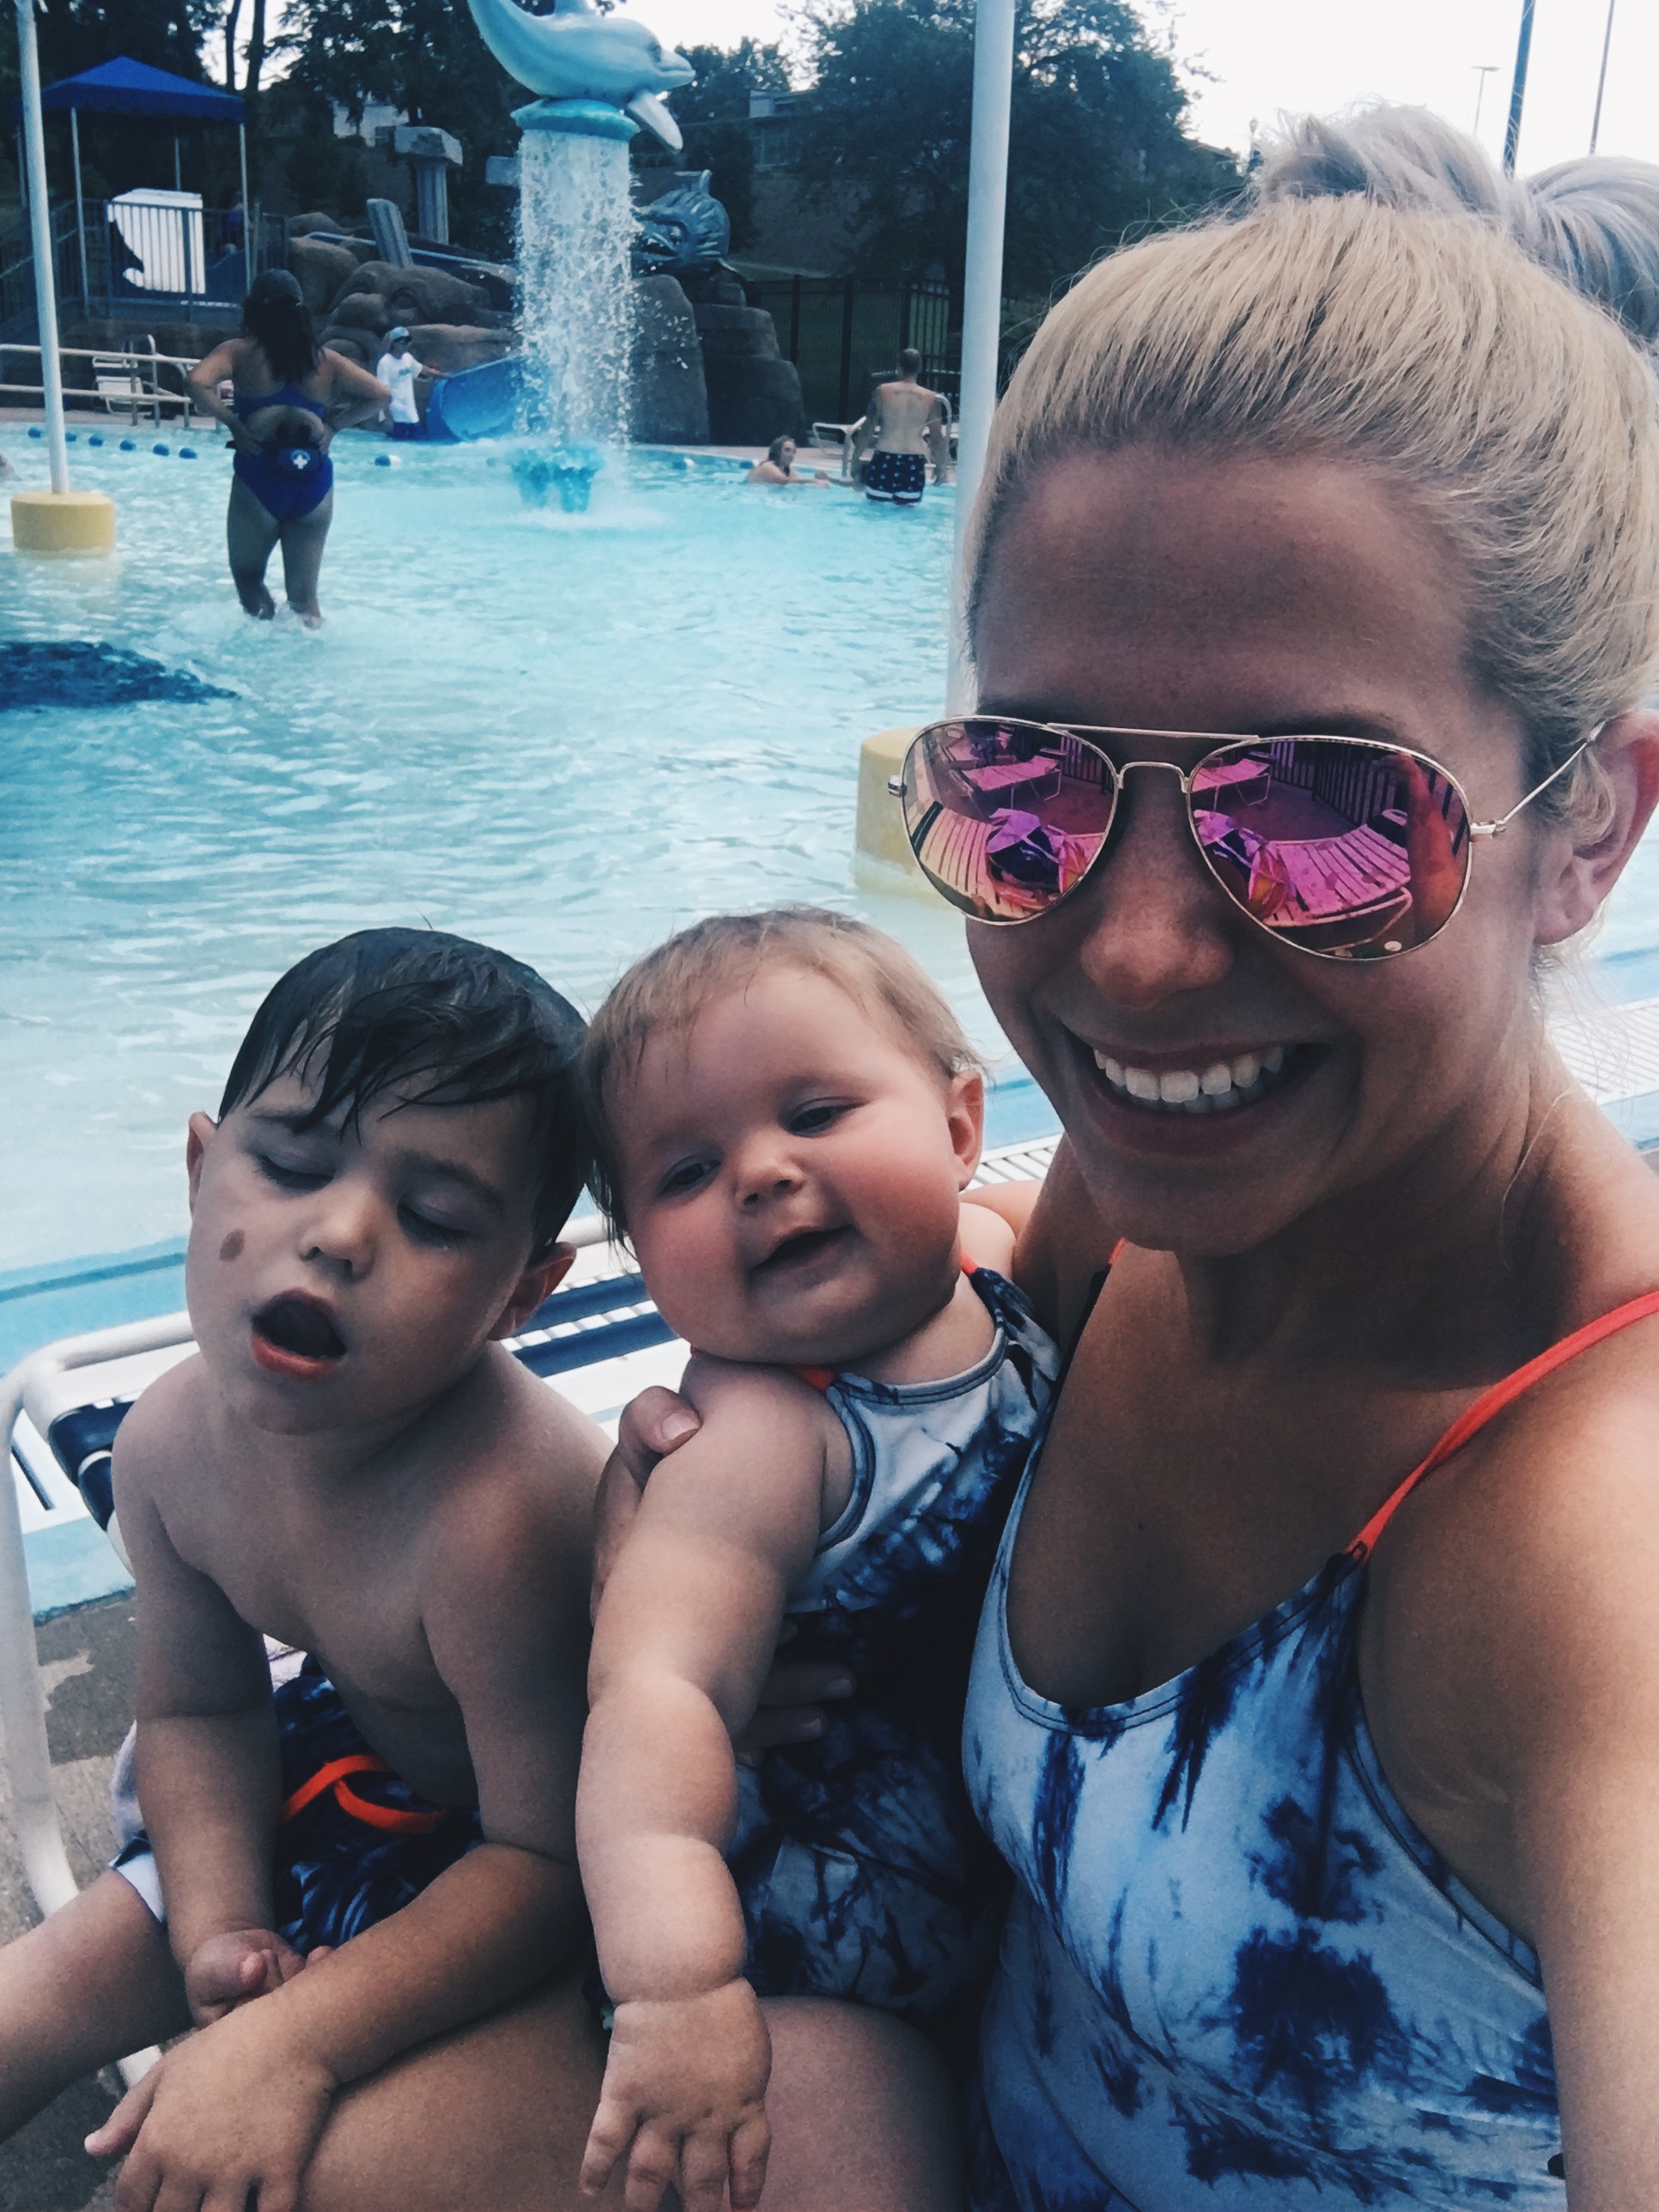 Benefits of Year-Round Swim Lessons -- The benefits of year-round swim lessons are many, and blogger Tricia Nibarger of COVET by tricia shares some of her favorites in this post. The importance of year-round swim lessons for kids is huge to avoid regression and keep a consistent routine. If you're wondering are year-round swim lessons worth it, here's the info you need! #MomBlogger #MommyBlogger #Swimming #SwimLessons #KidActivities